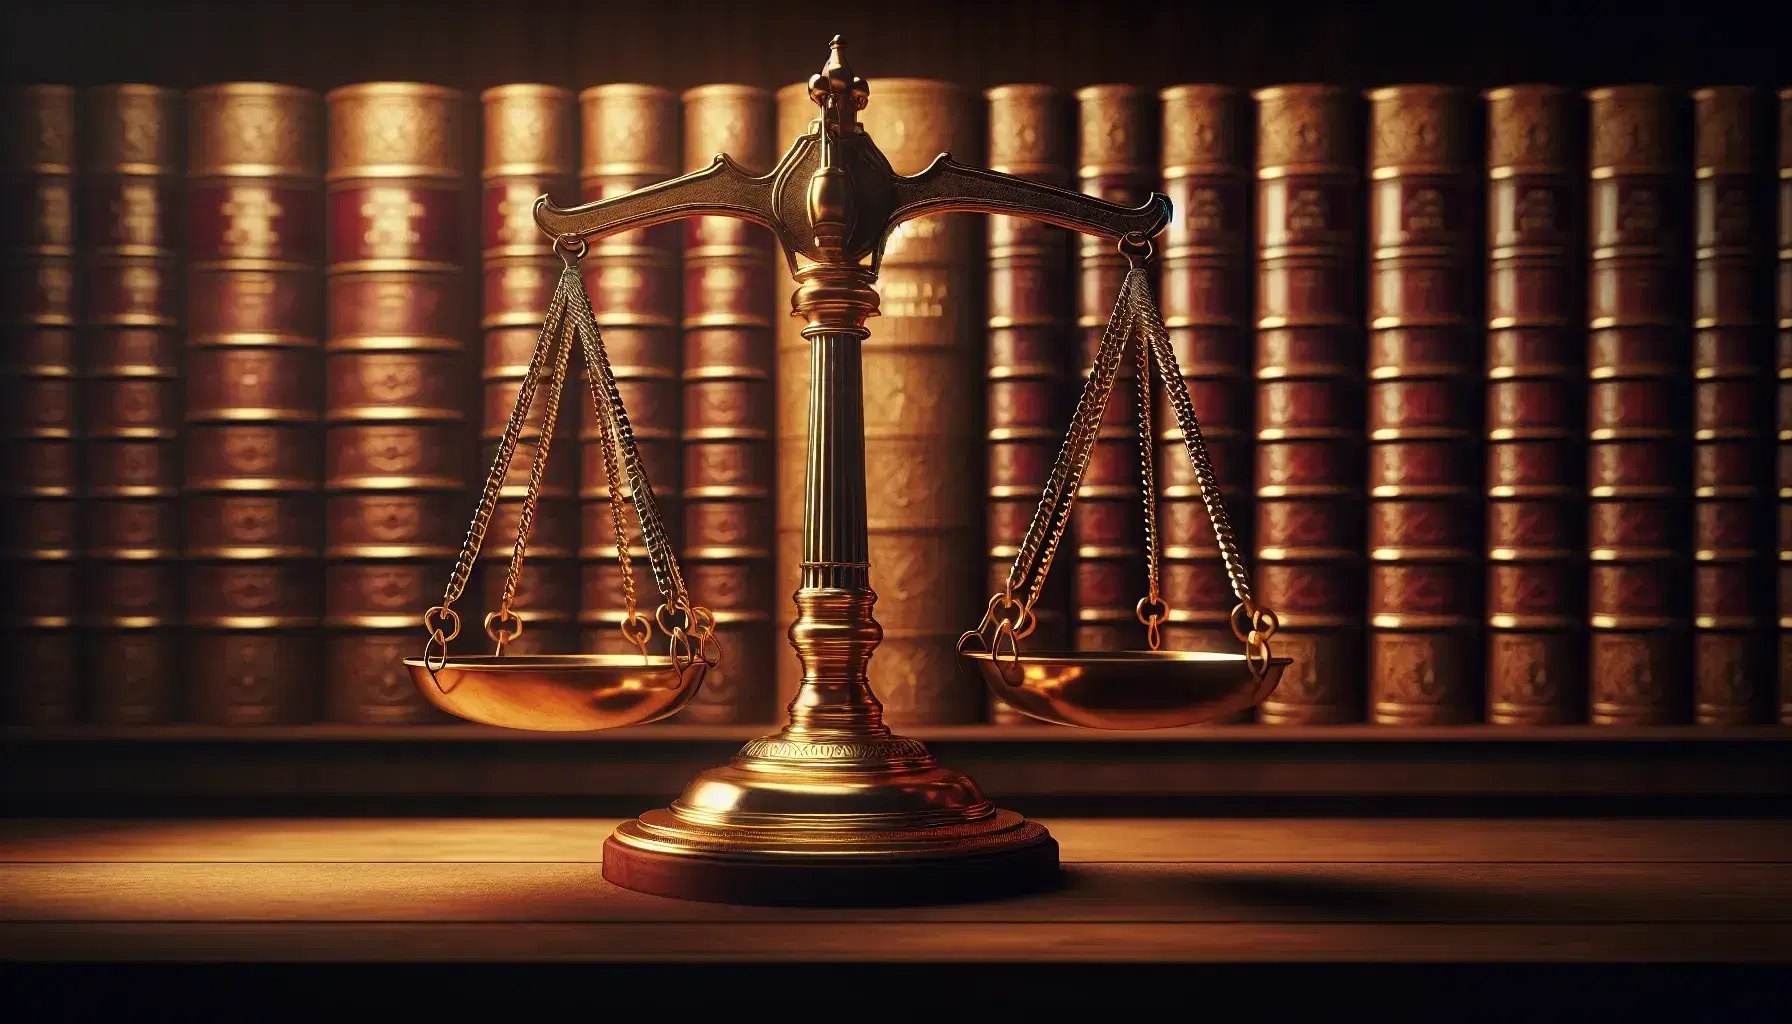 Balanced brass scale of justice in the foreground with a backdrop of leather-bound books on a dark wooden shelf, symbolizing law and order.